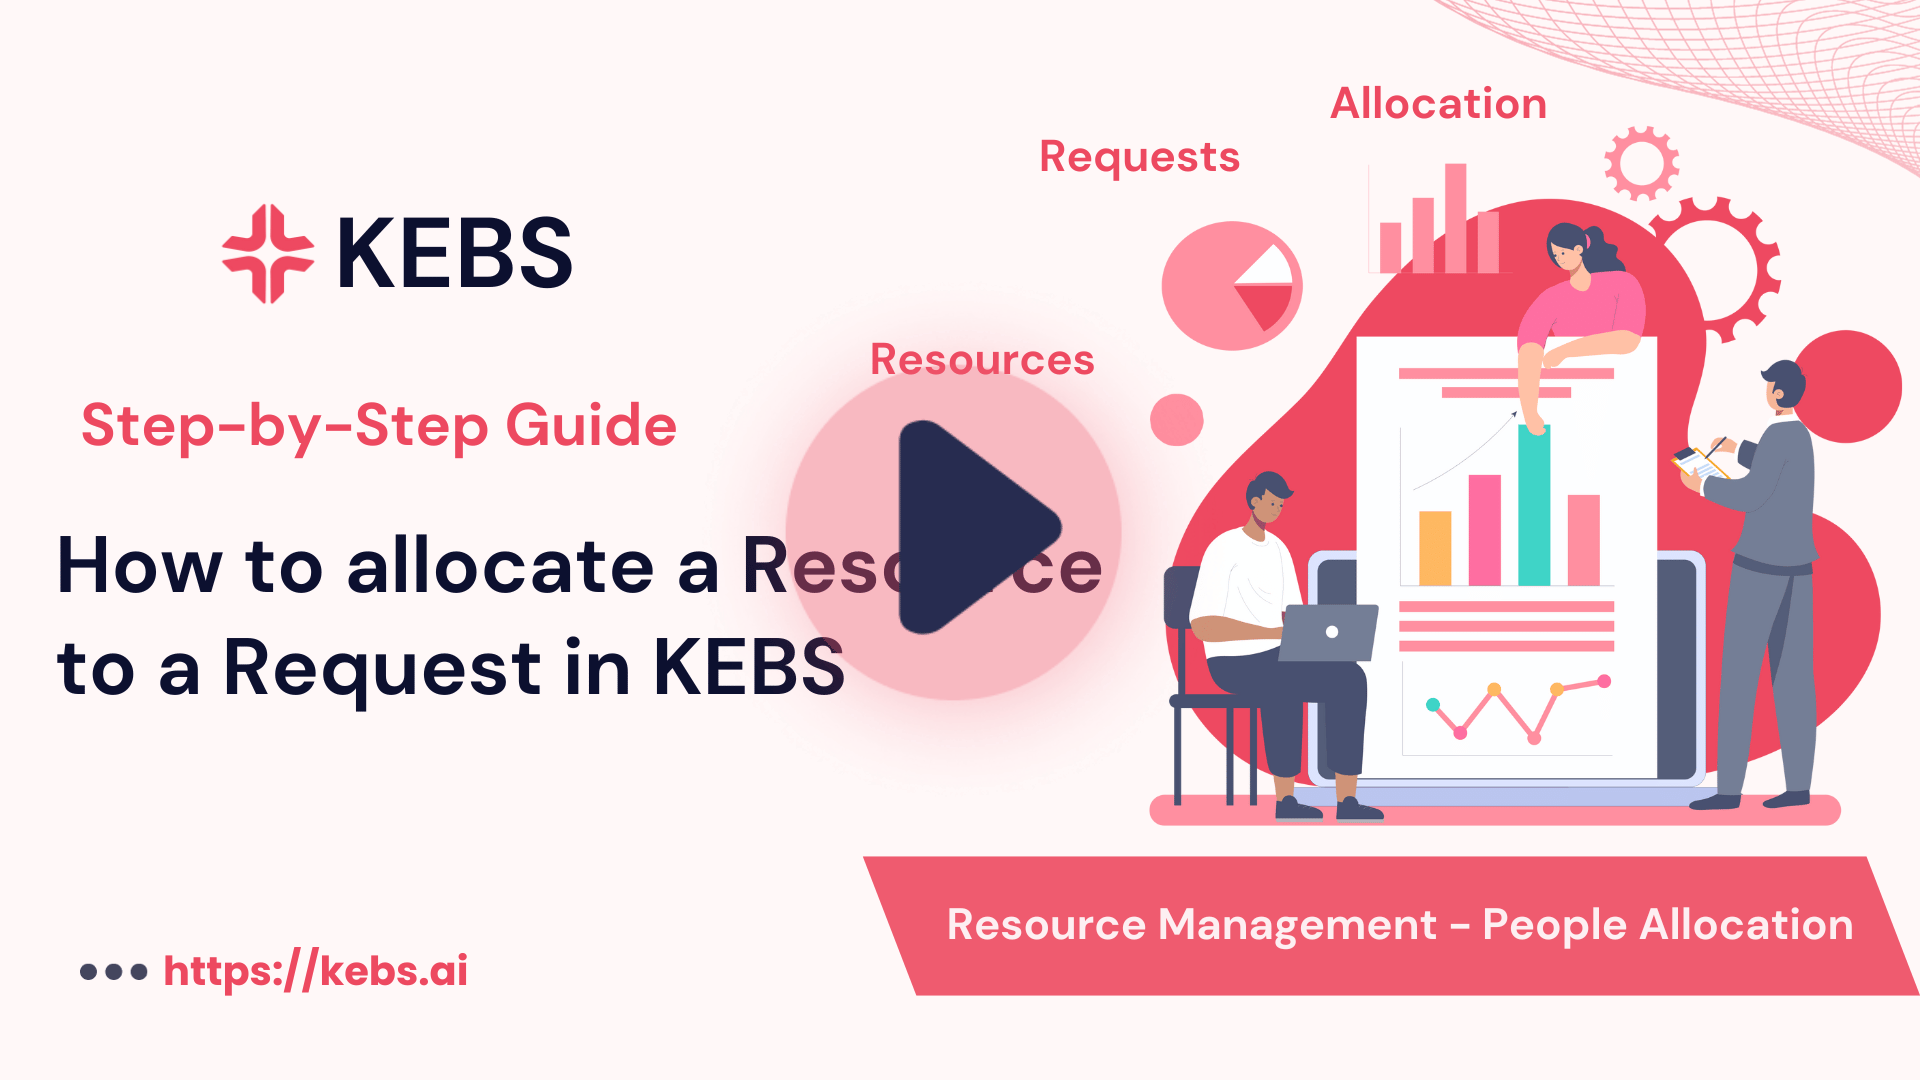 How to allocate a Resource to a Request in KEBS